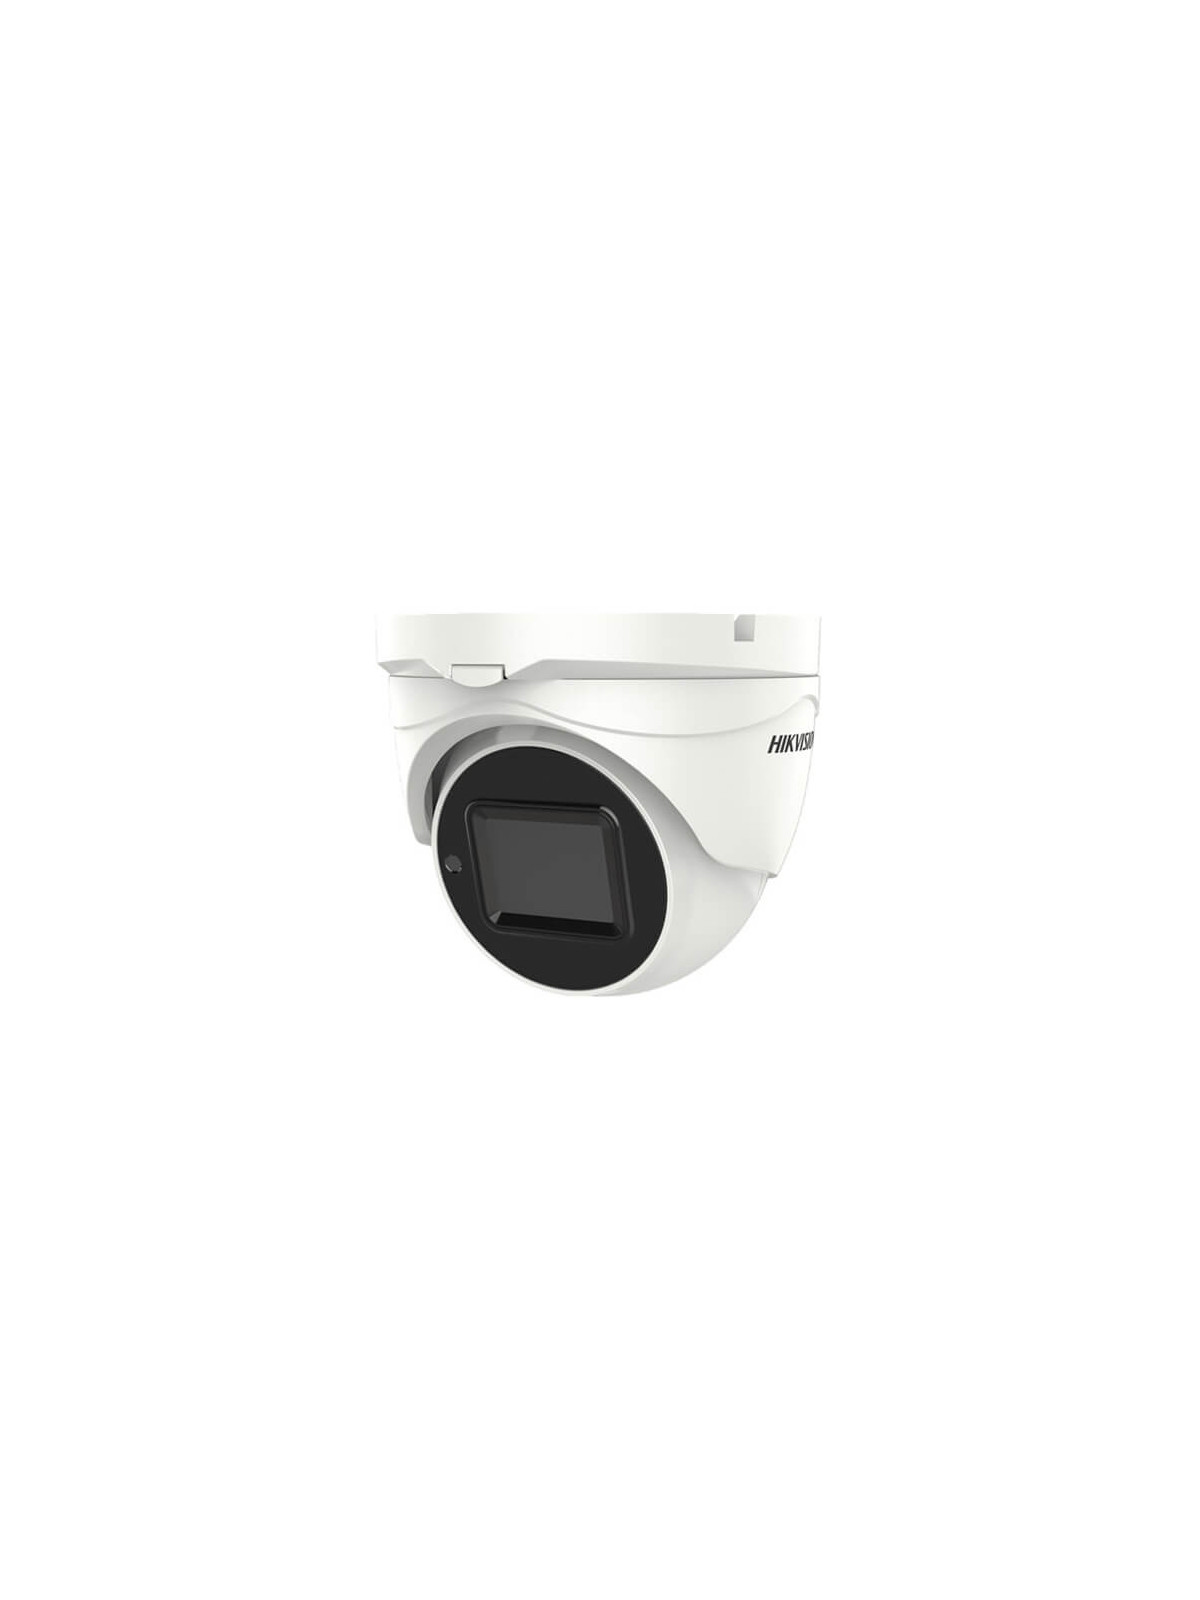 Domo HDTVI Hikvision DS-2CE79U8T-IT3Z 8MP IR80m 2.8-12mm motorizada WDR